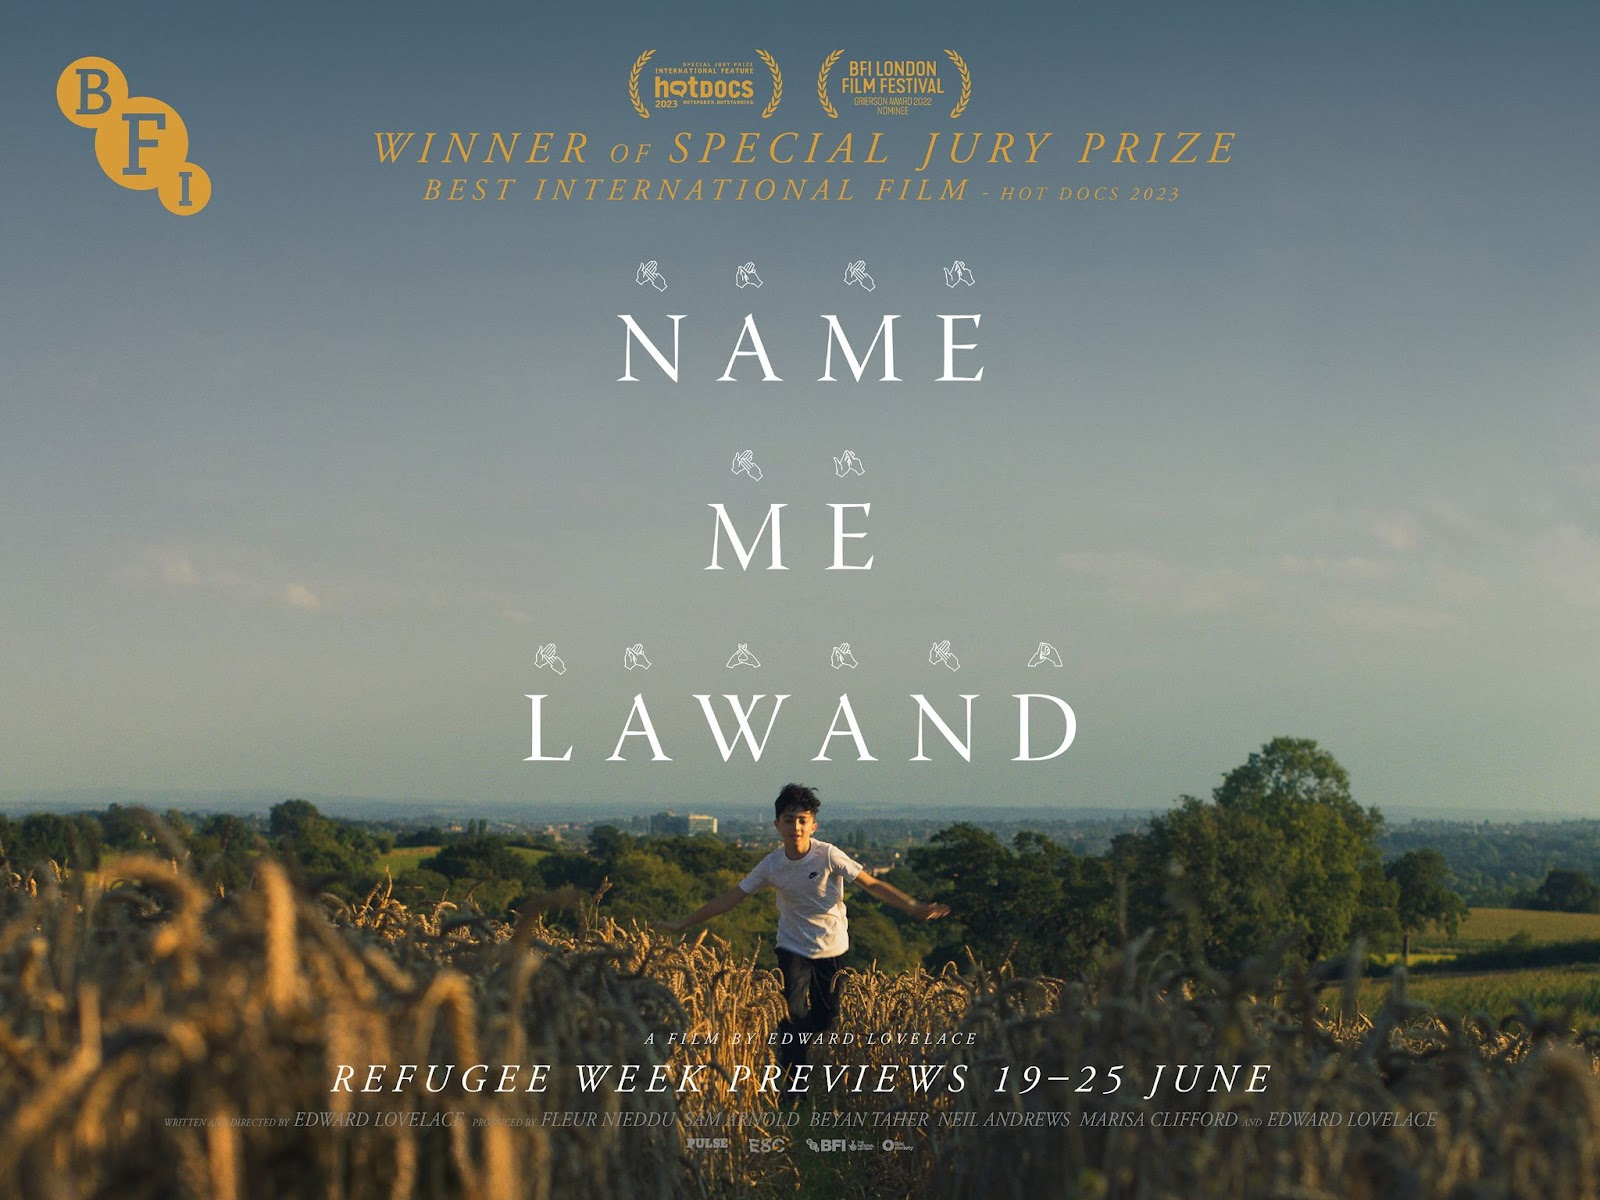 Movie poster of the 'Name Me Lawand' movie